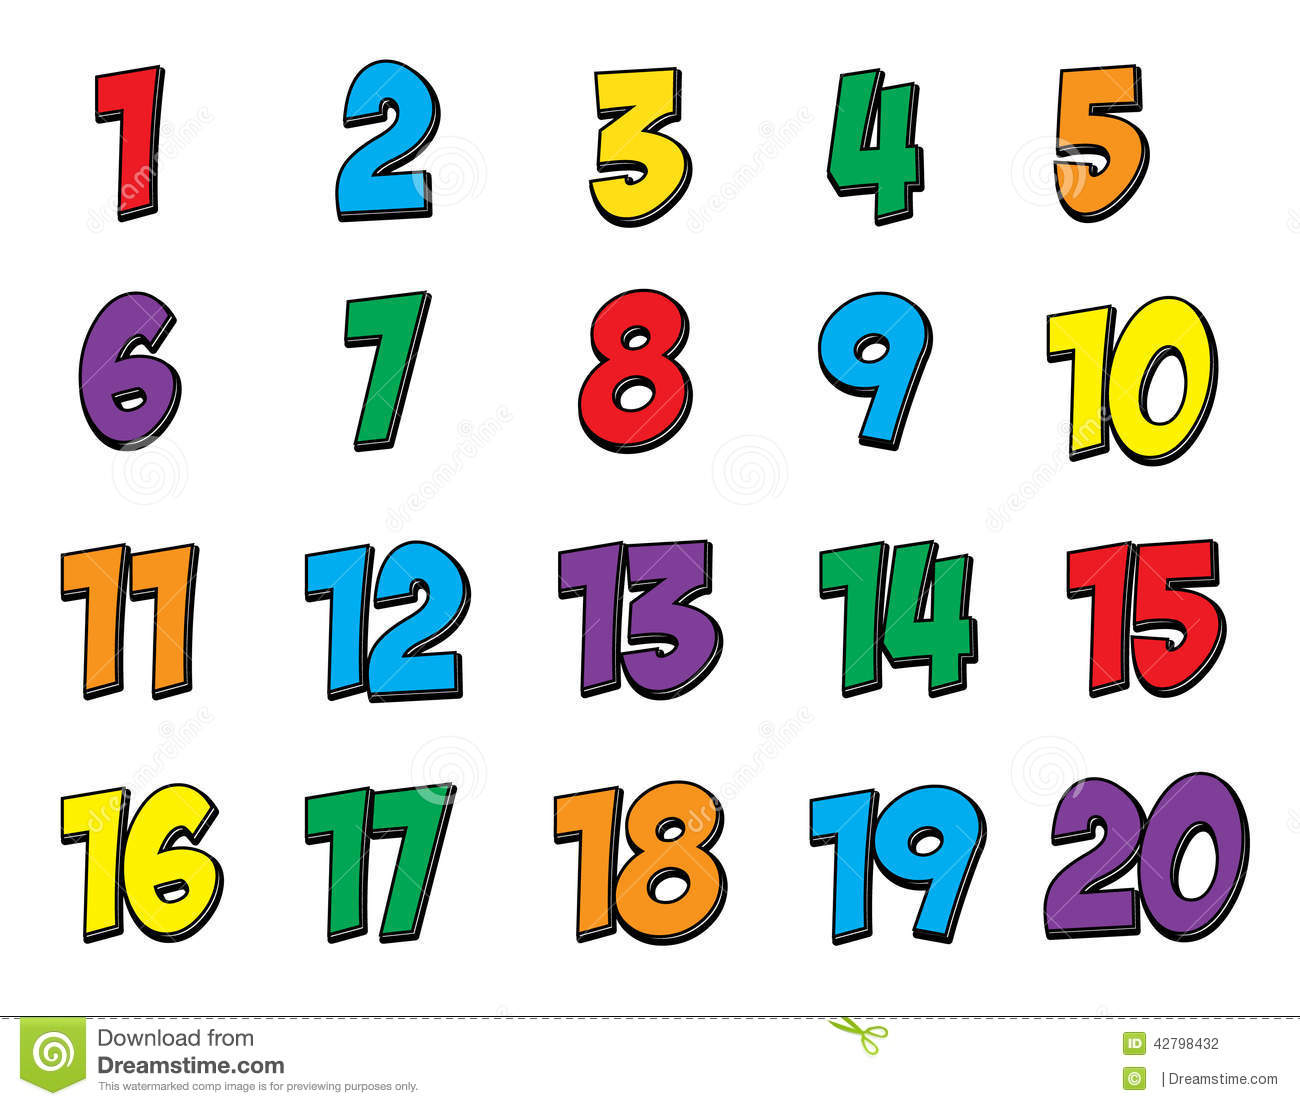 This Is A Colorful Number Set Numbers 1 Through 20